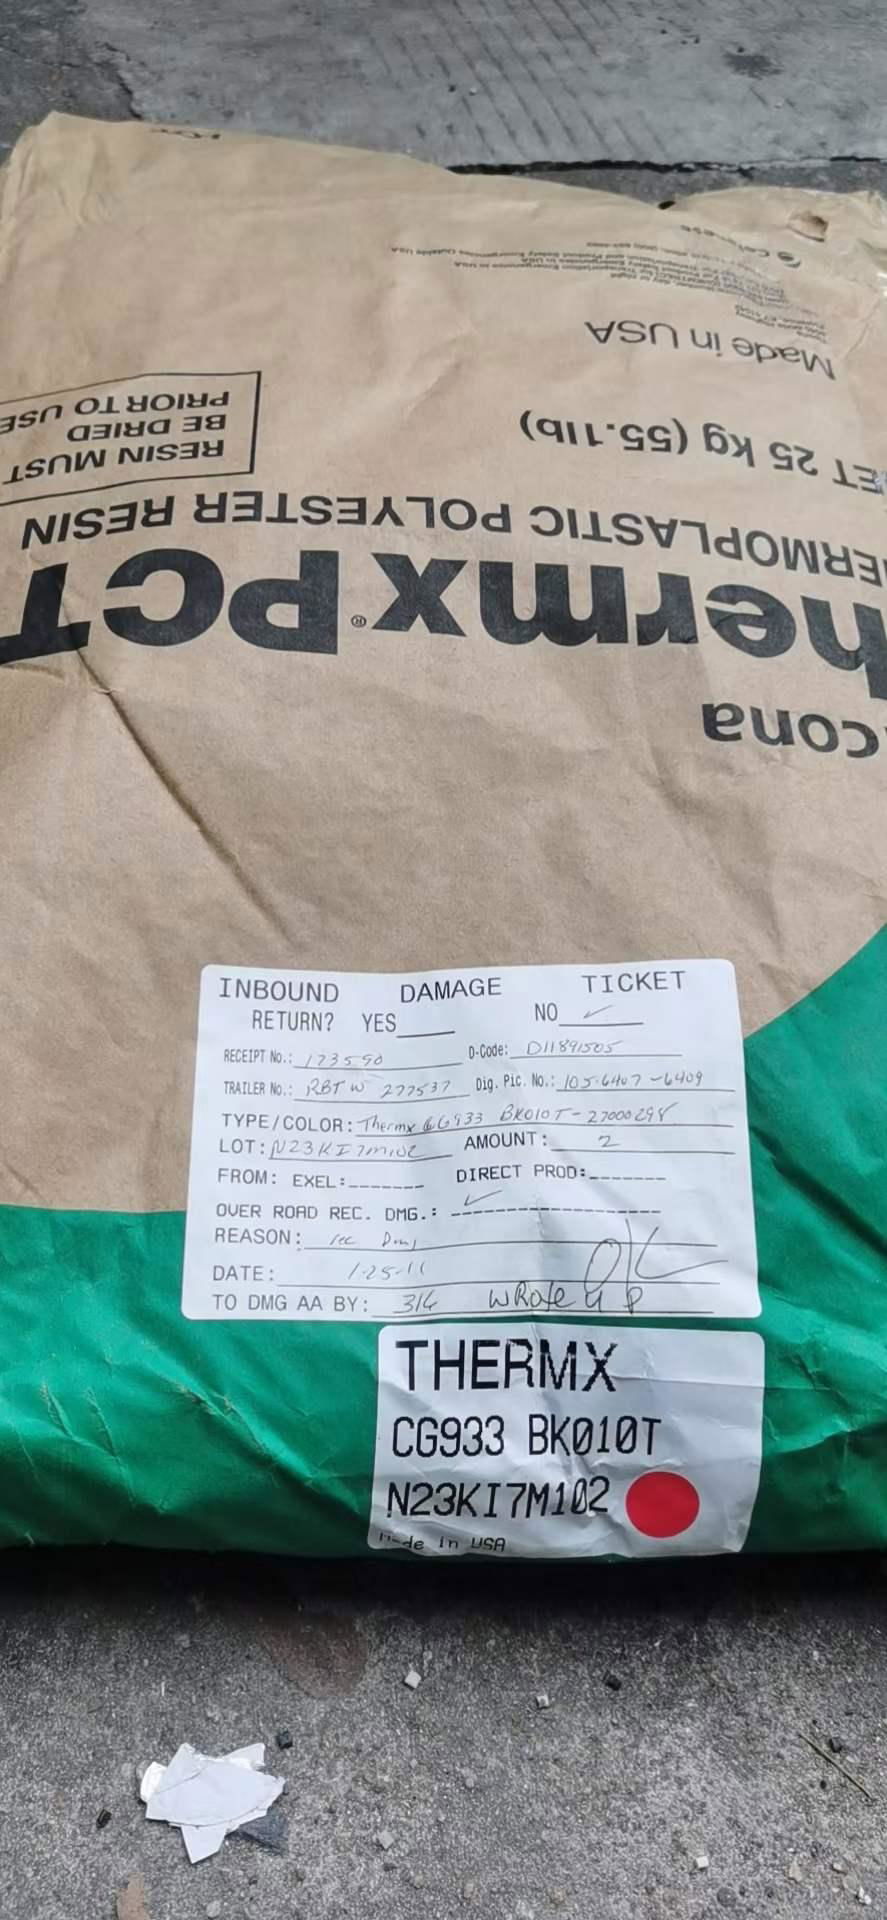 THERMX CG933 BK010T (TICONA OLD PACKAGING)